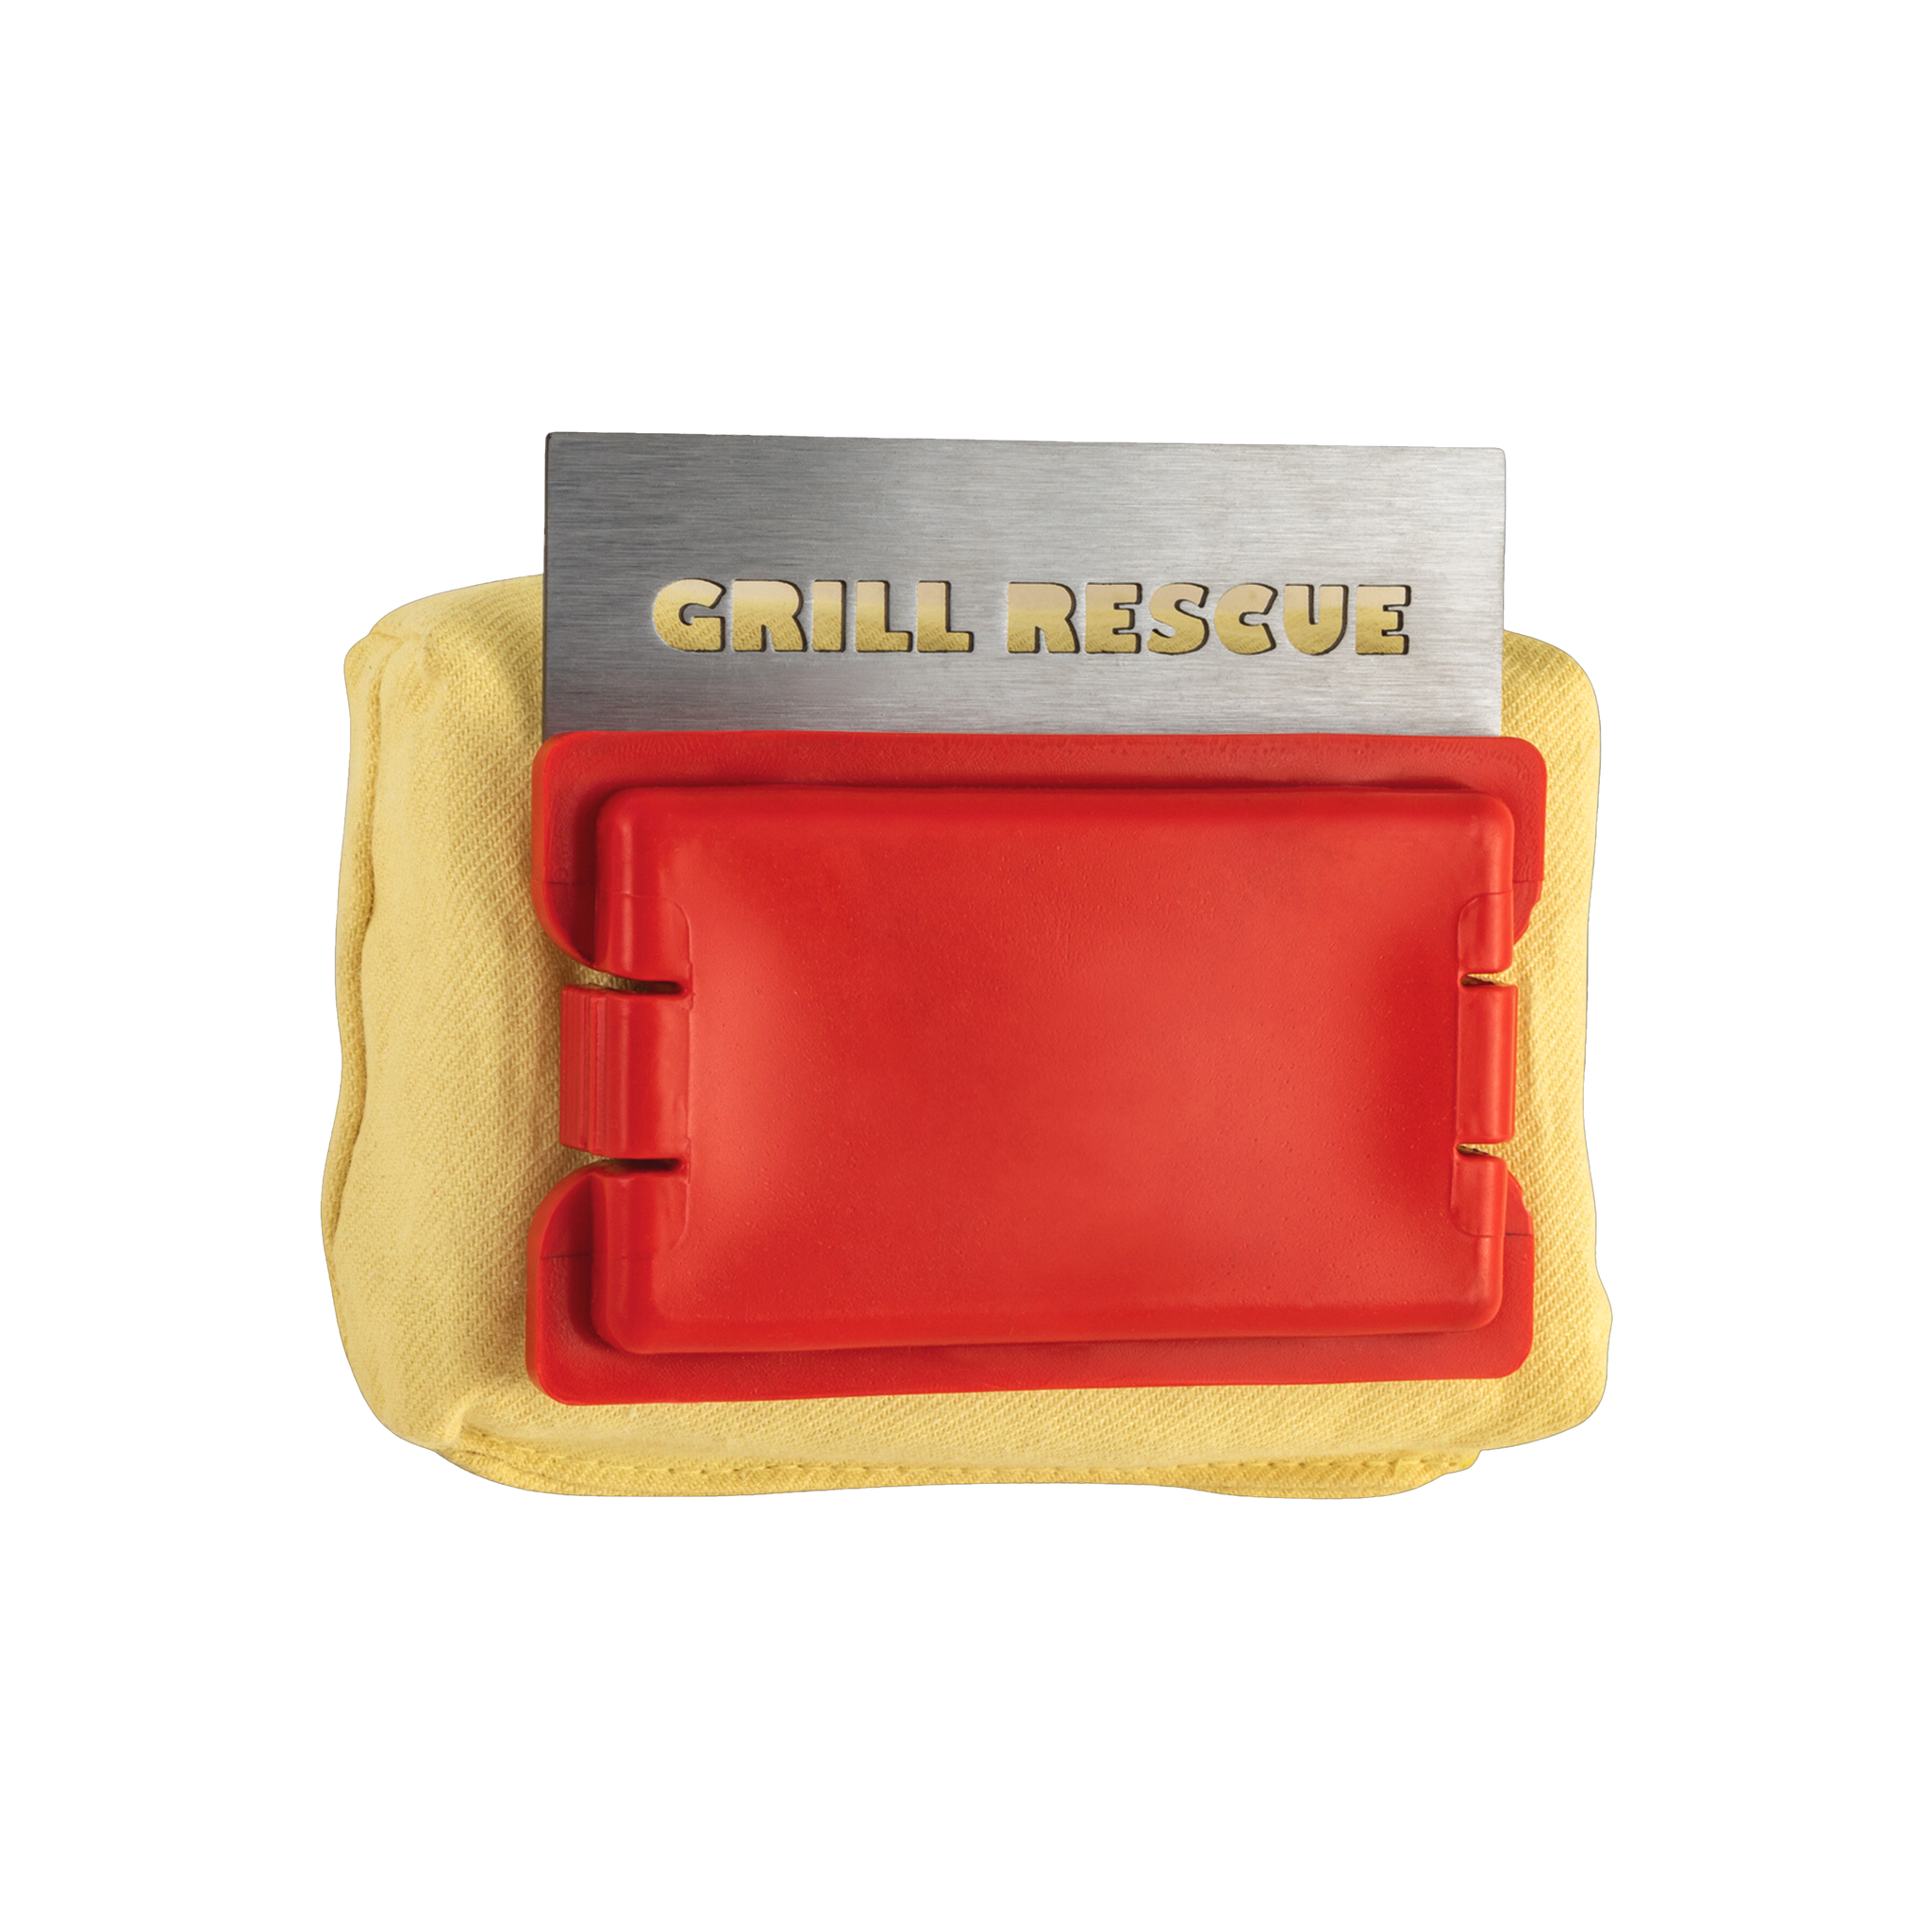 Track Grill Rescue - The World's Best Grill Brush's Indiegogo